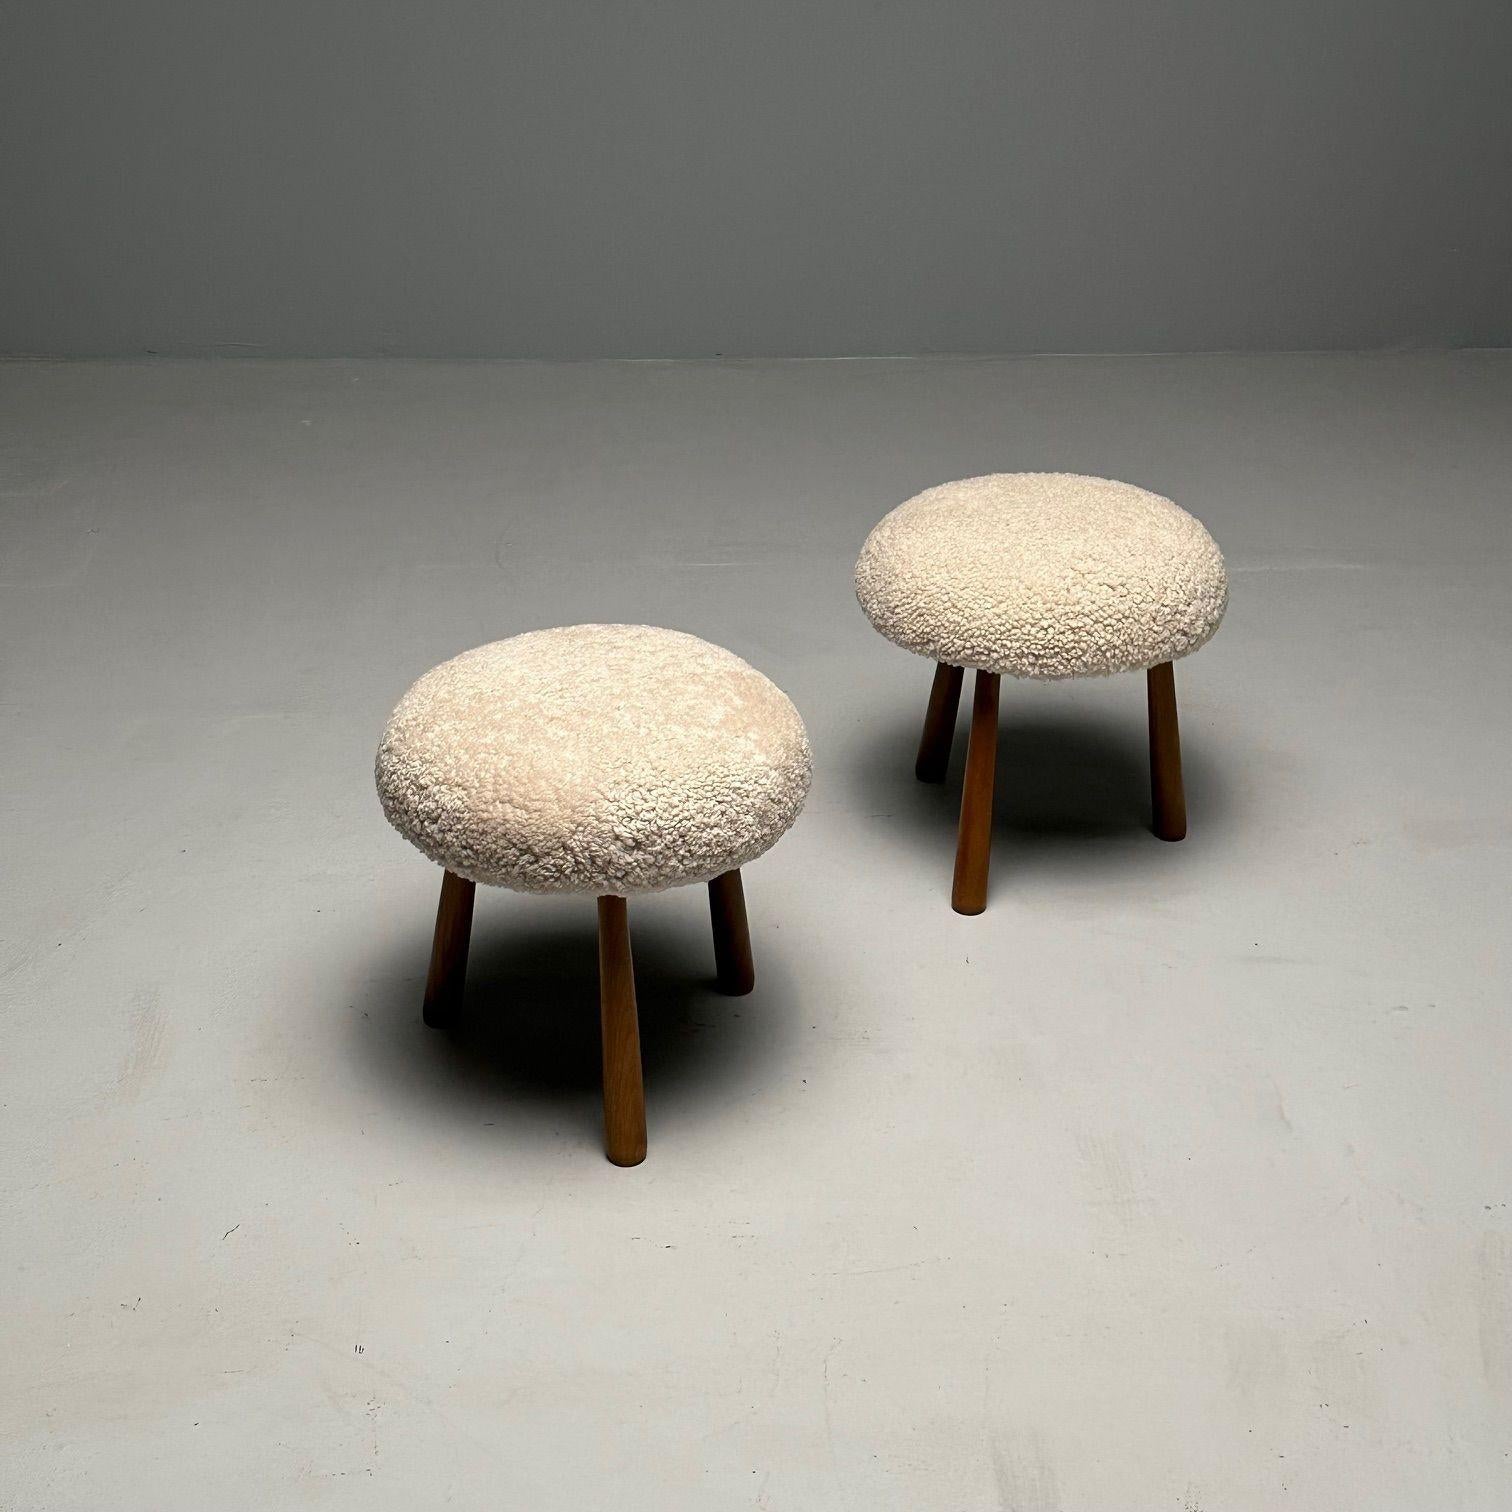 Pair Contemporary Sheepskin Stools / Ottomans, Swedish Modern Style, Shearling For Sale 6